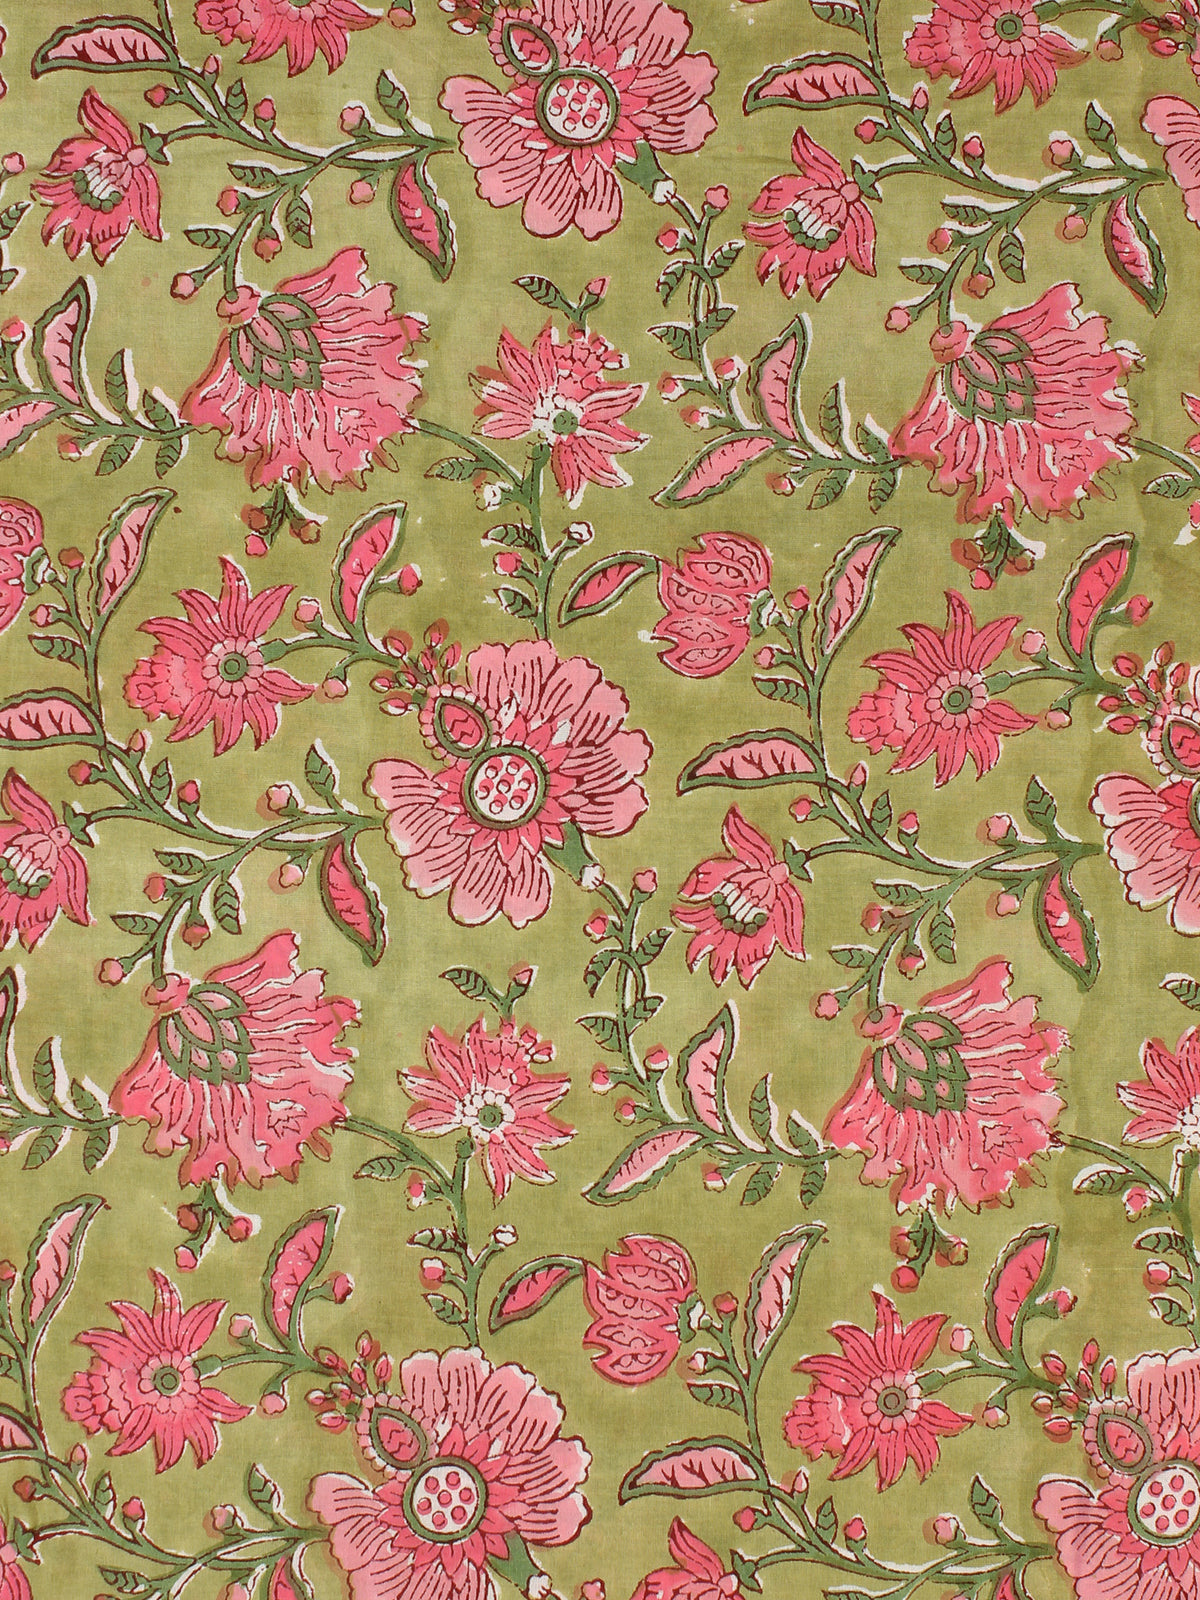 Olive Green Pink Hand Block Printed Cotton Fabric Per Meter - F001F2309